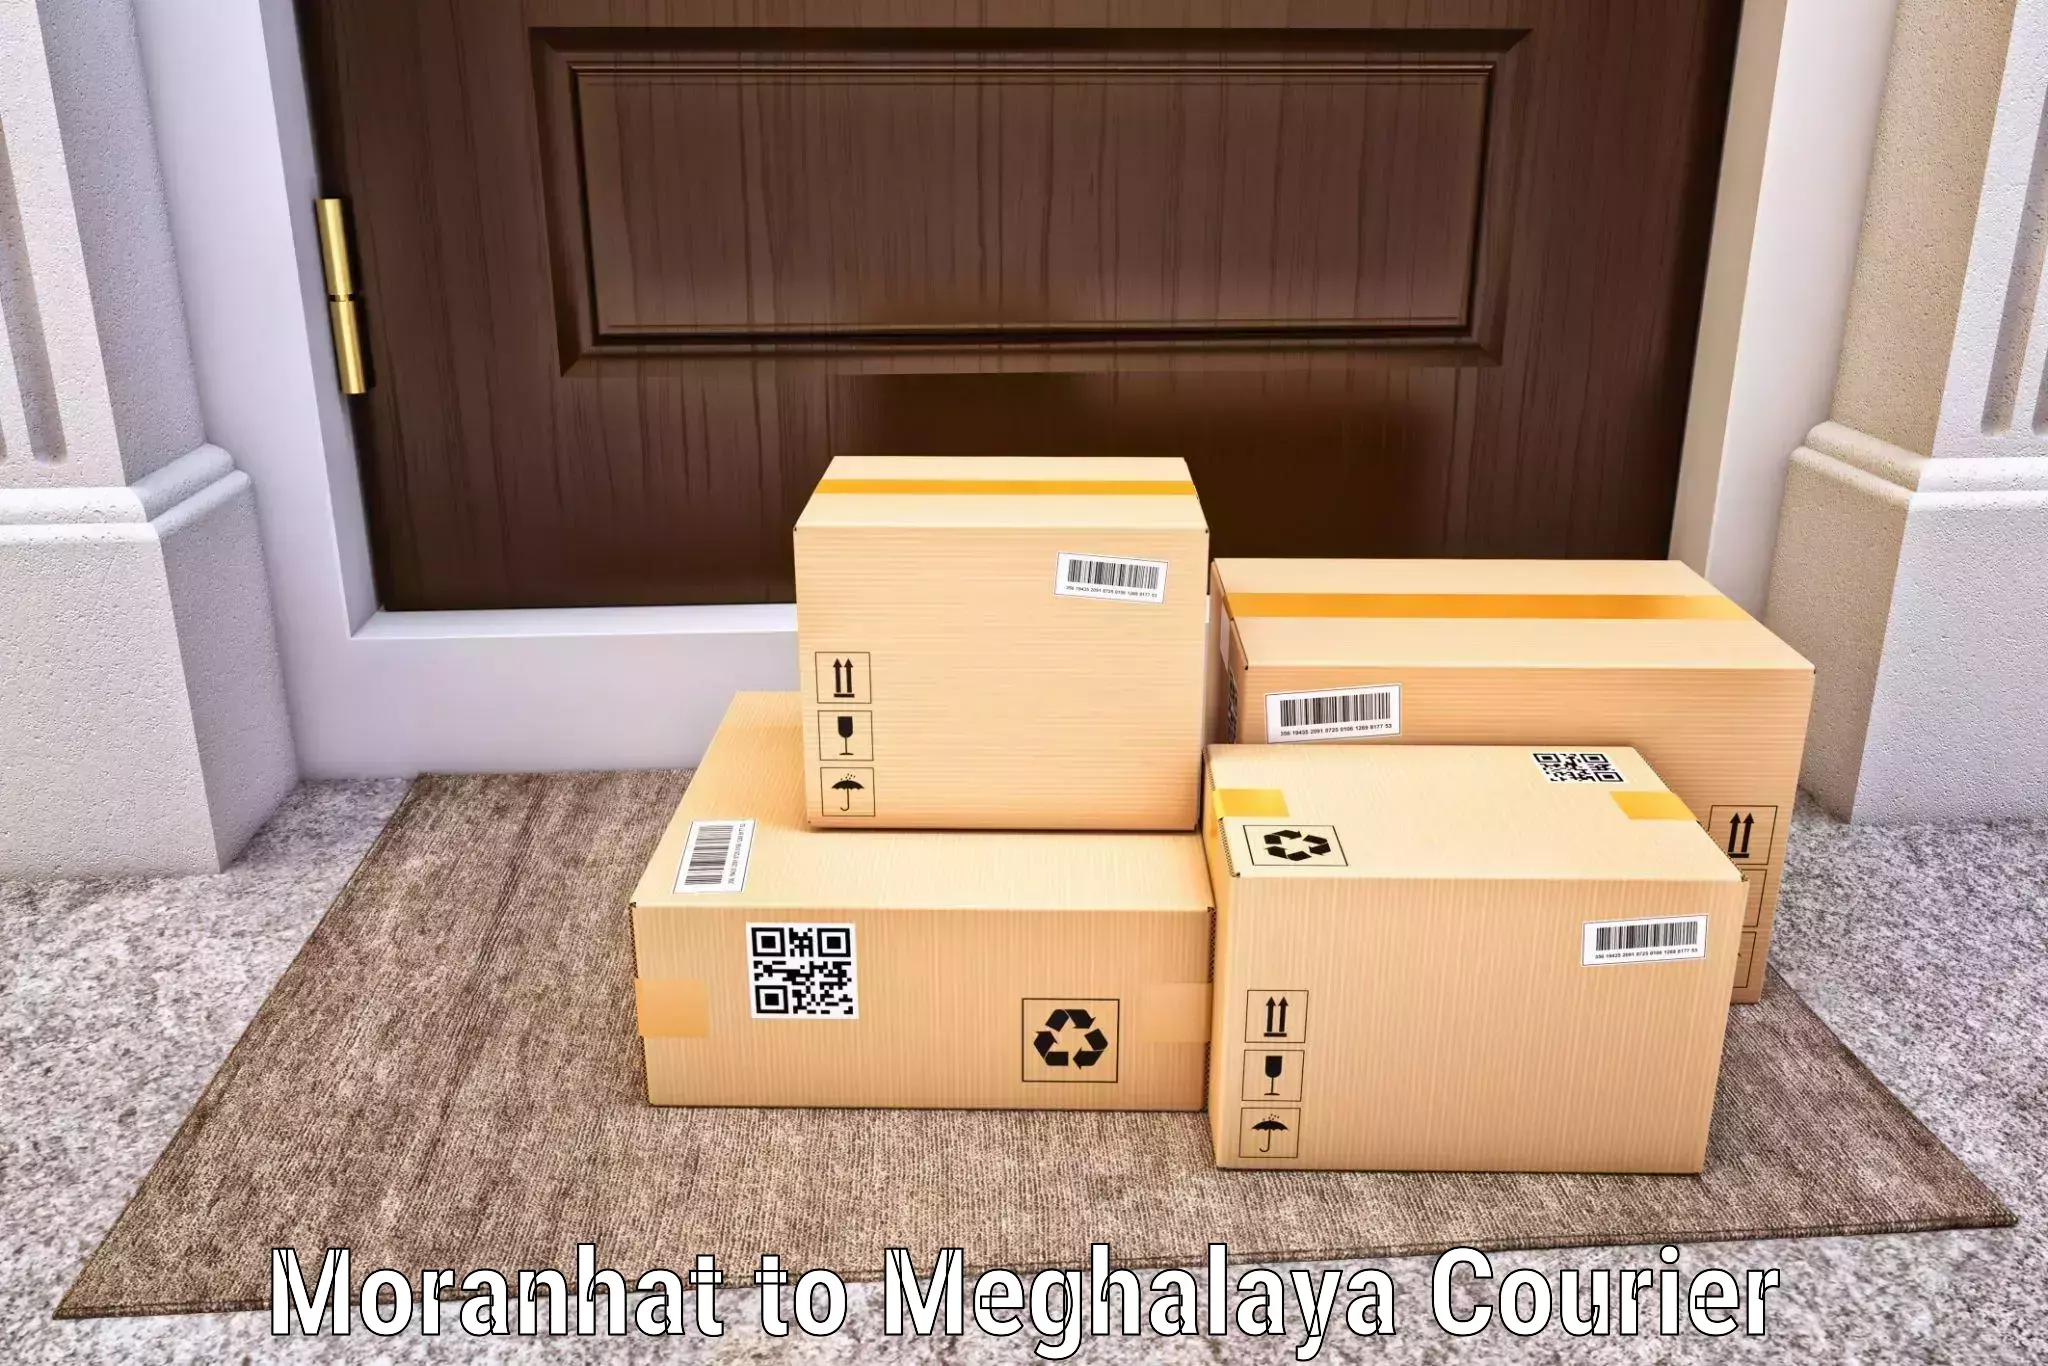 Package delivery network Moranhat to Nongstoin